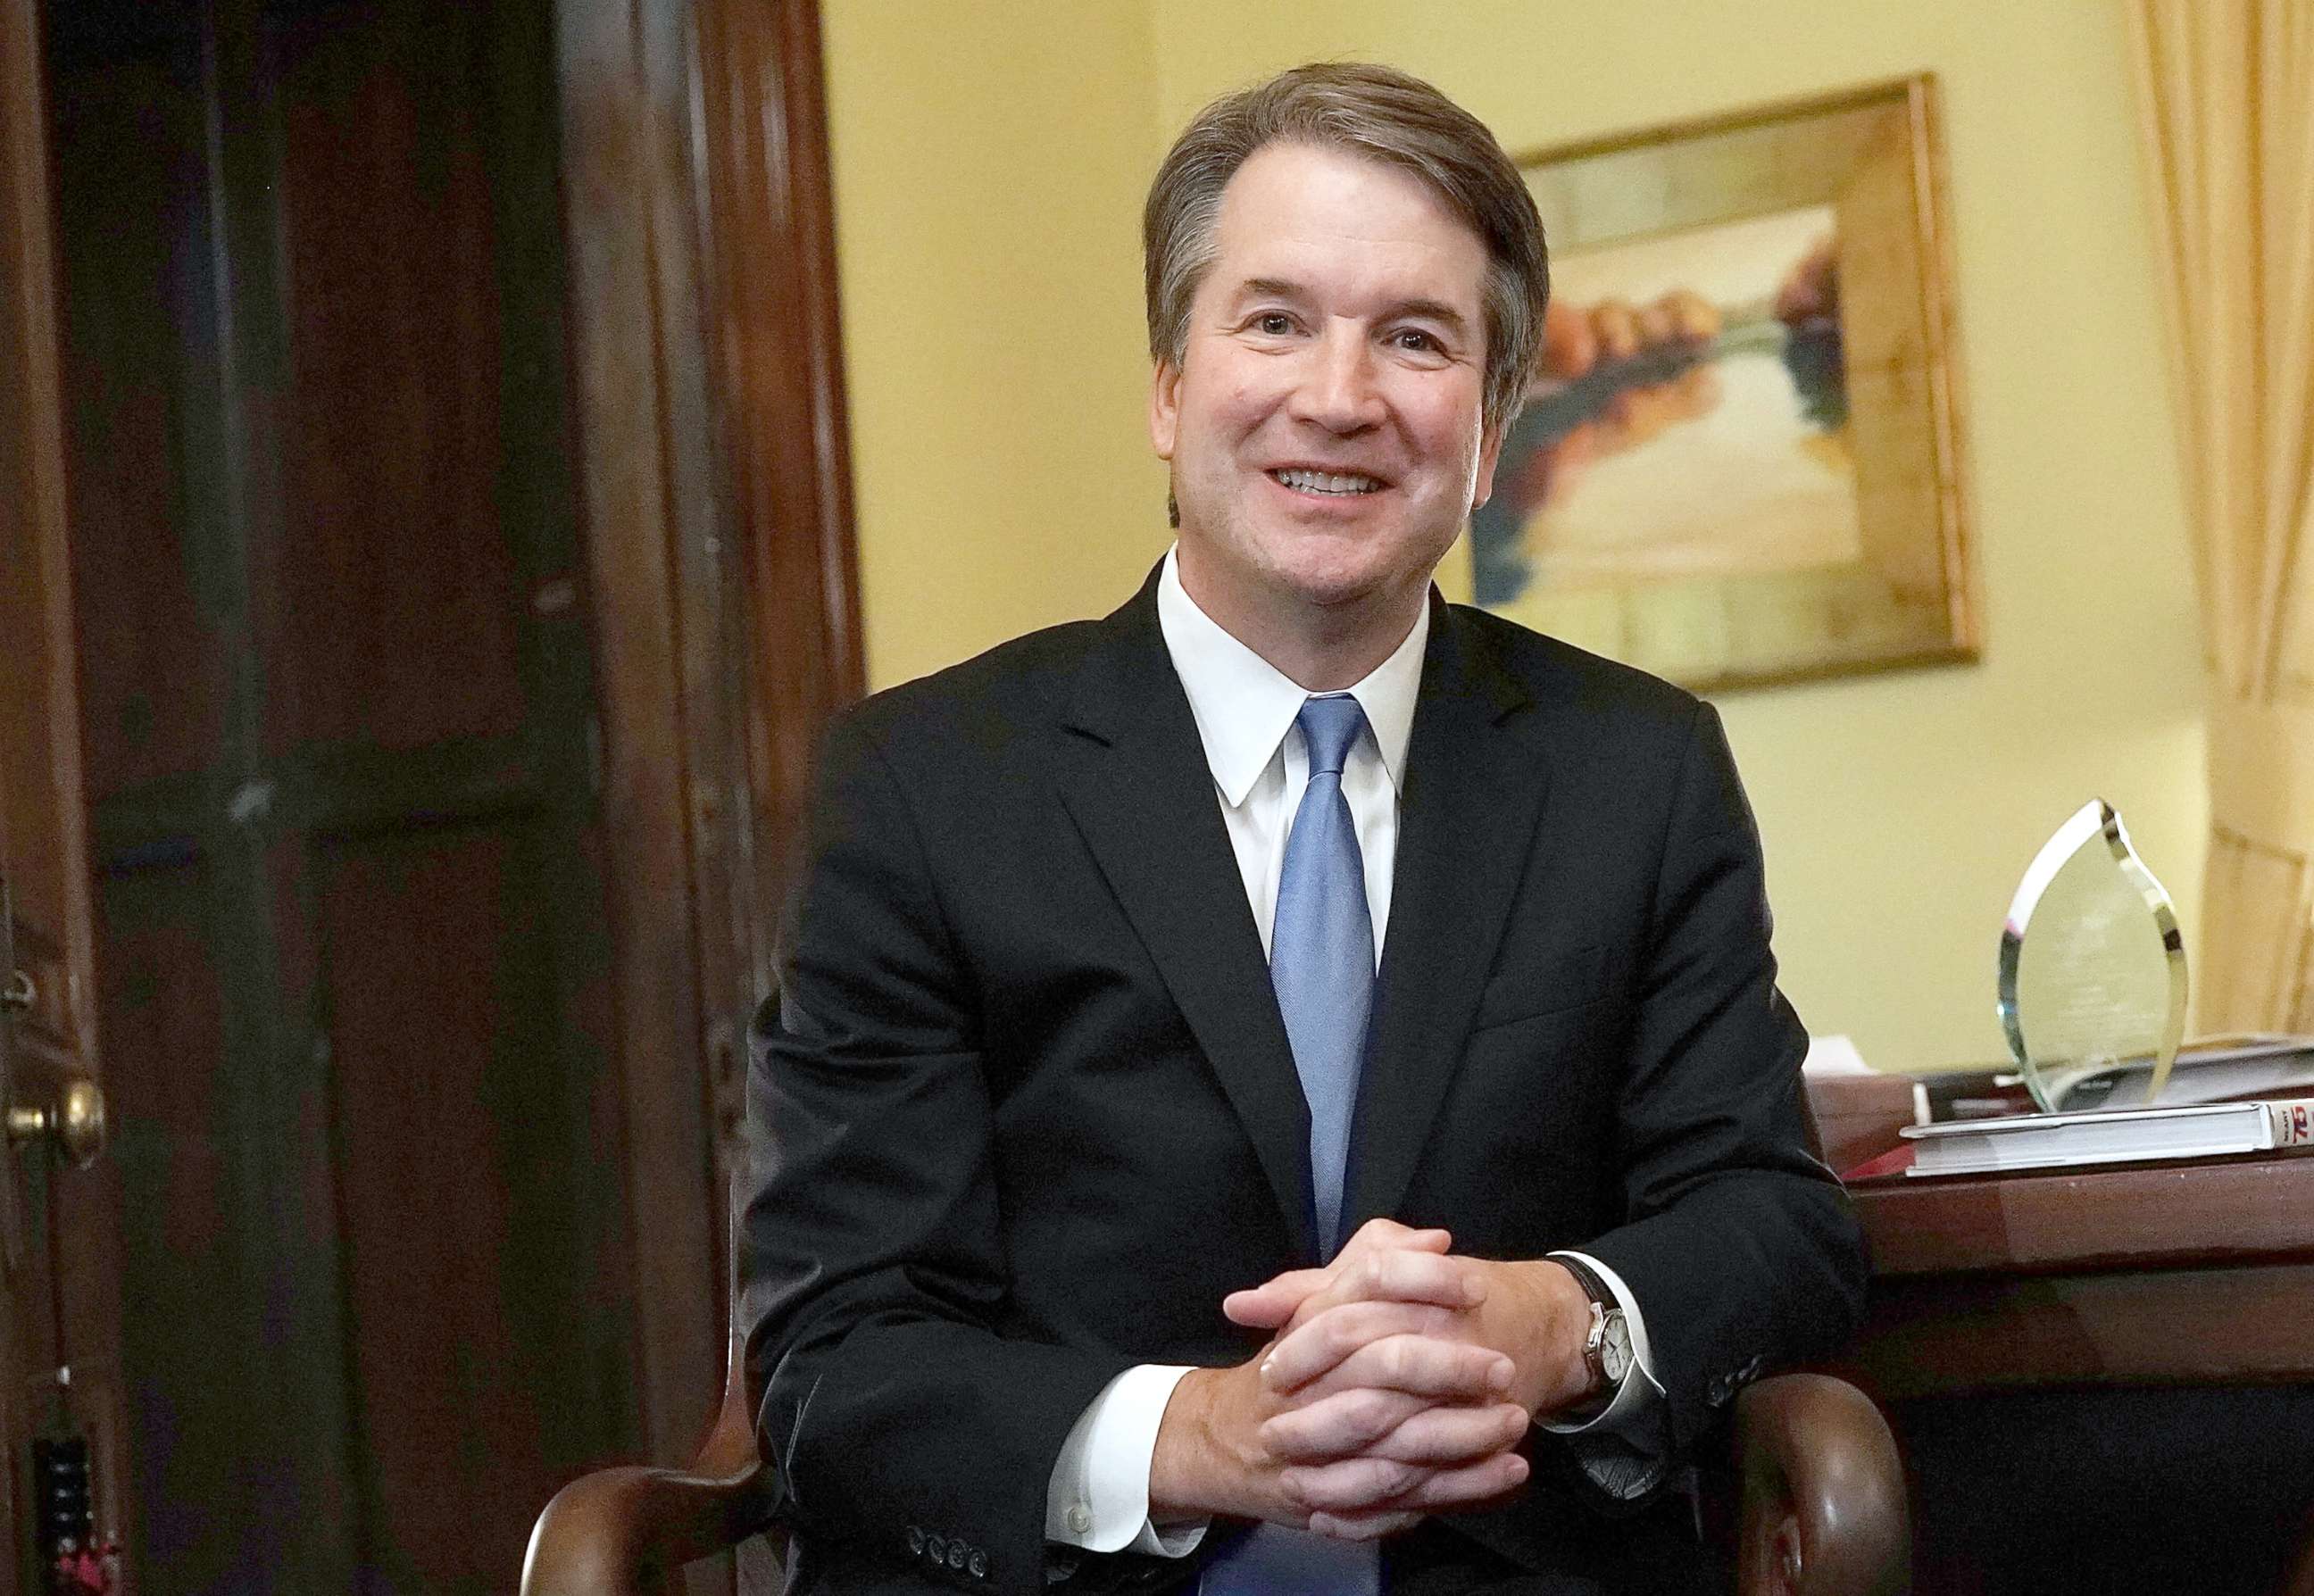 PHOTO: Supreme Court nominee Judge Brett Kavanaugh during a meeting with U.S. Sen. Johnny Isakson on Capitol Hill, July 17, 2018, in Washington, DC.